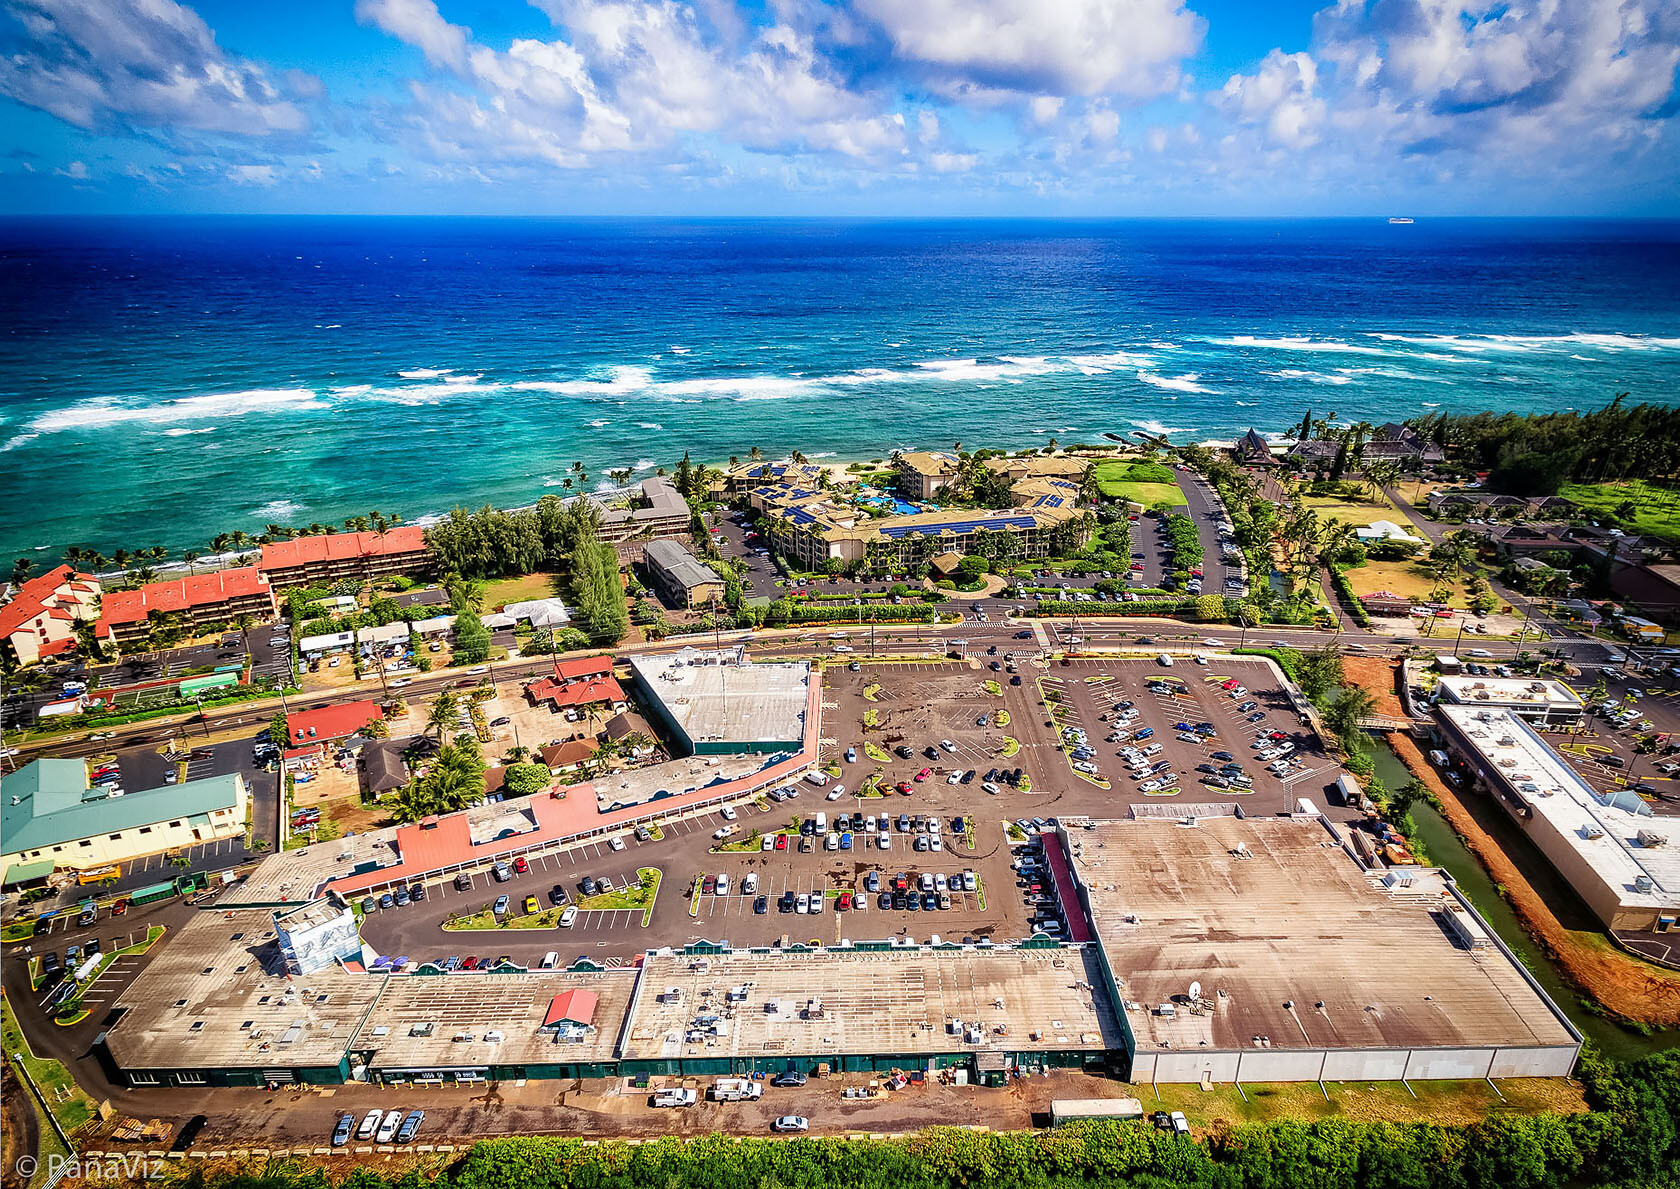 Hawaii Commercial Photography